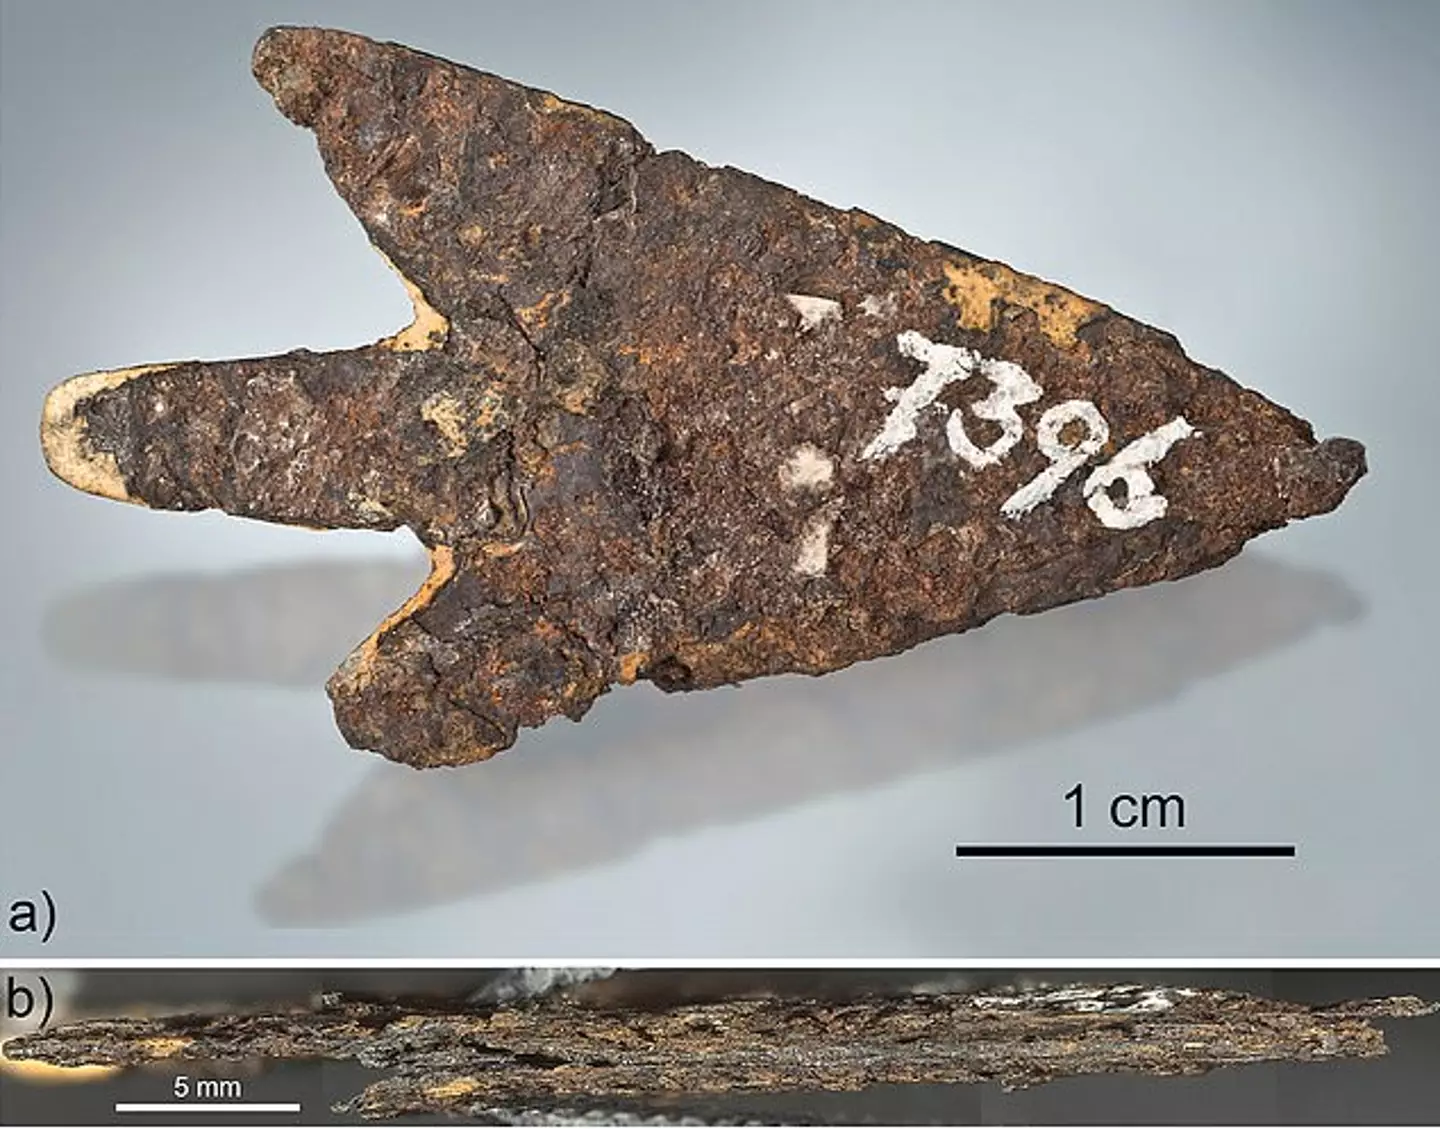 The arrowhead measures 1.5 inches long.